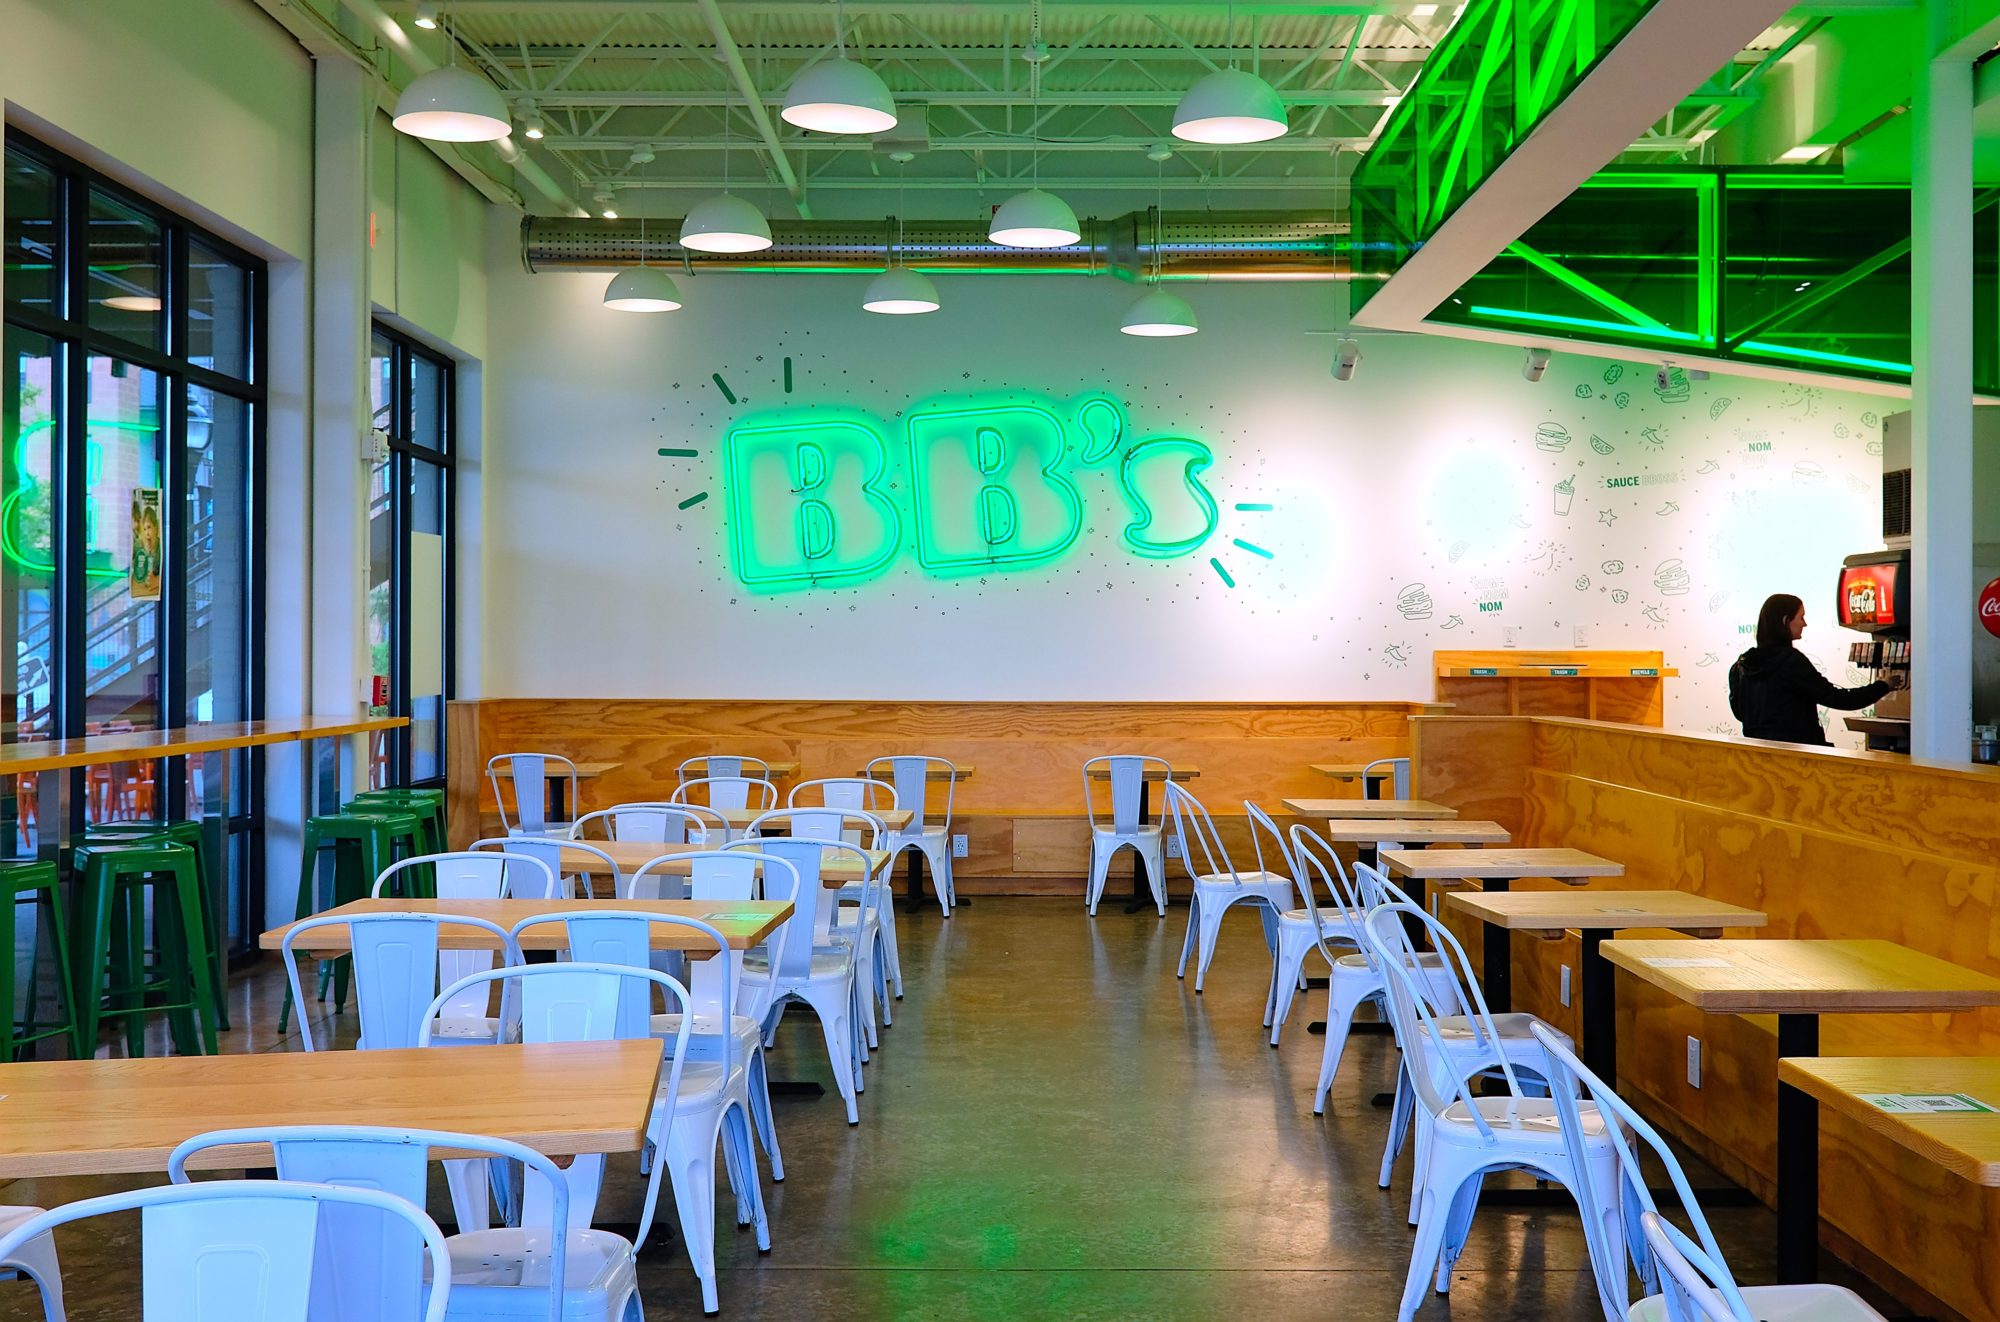 Interior of BB's Crispy Chicken, with a large green neon sign